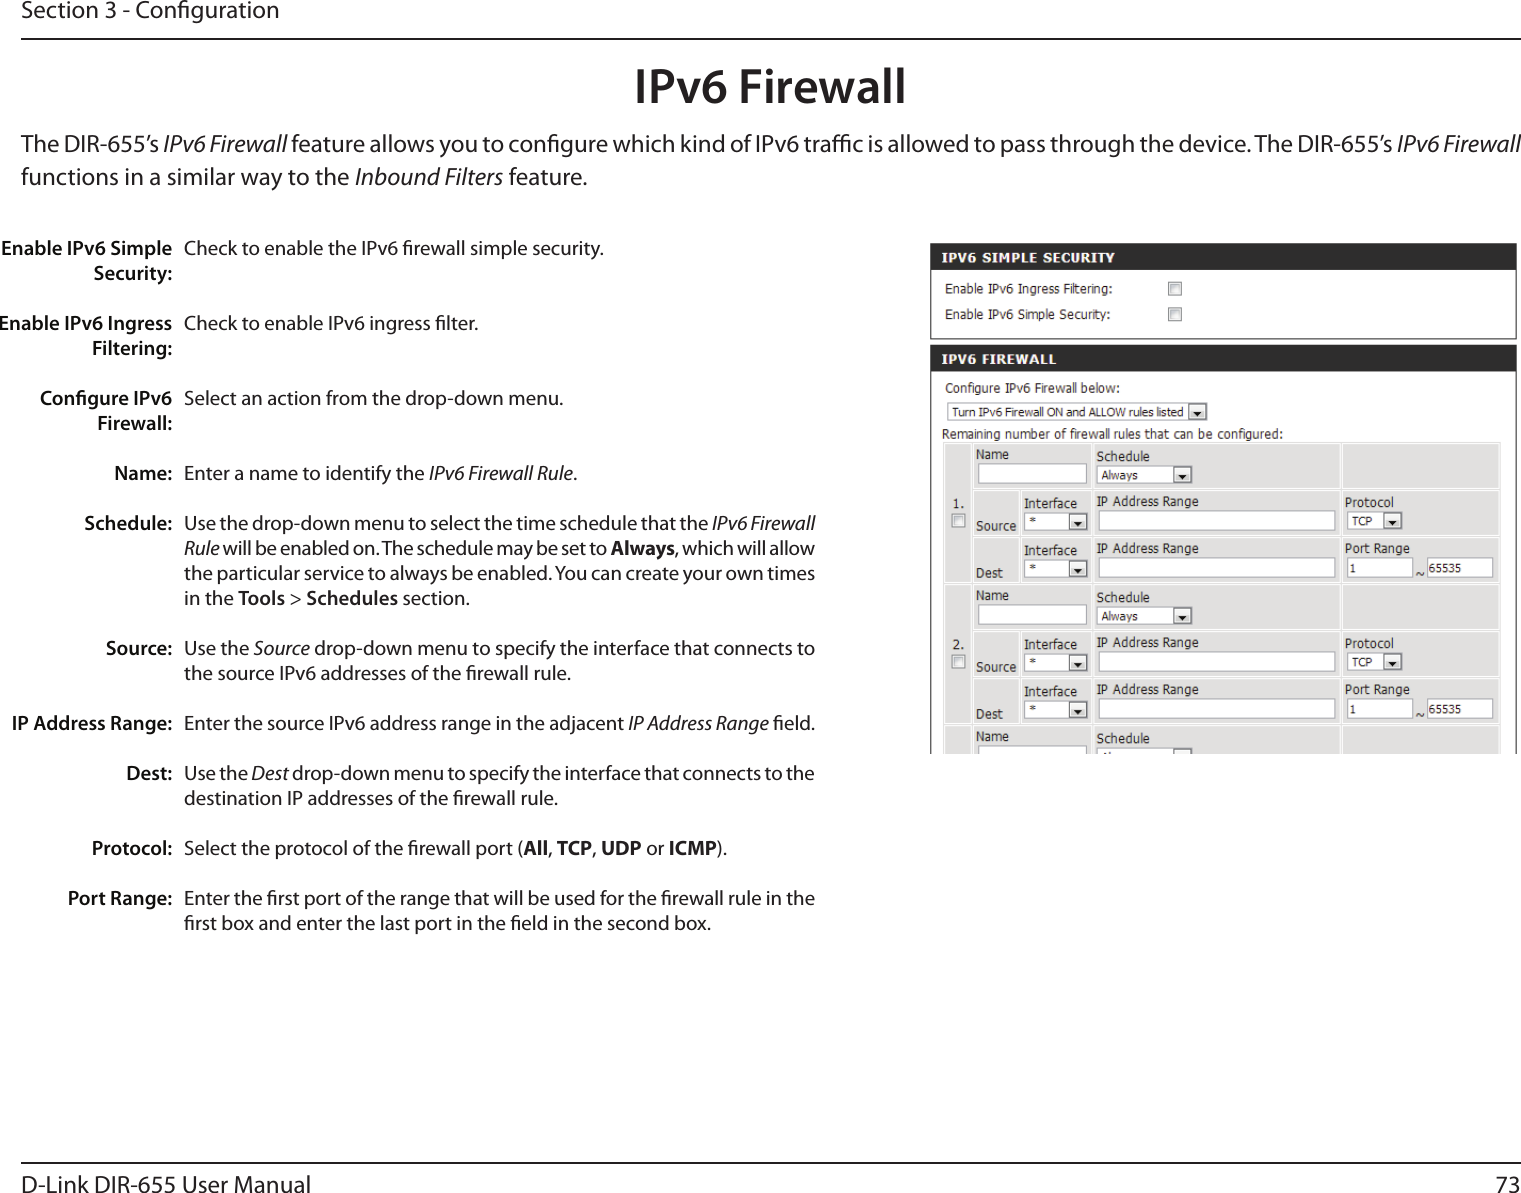 73D-Link DIR-655 User ManualSection 3 - CongurationIPv6 FirewallThe DIR-655’s IPv6 Firewall feature allows you to congure which kind of IPv6 trac is allowed to pass through the device. The DIR-655’s IPv6 Firewall functions in a similar way to the Inbound Filters feature.Check to enable the IPv6 rewall simple security.Check to enable IPv6 ingress lter.Select an action from the drop-down menu.Enter a name to identify the IPv6 Firewall Rule.Use the drop-down menu to select the time schedule that the IPv6 Firewall Rule will be enabled on. The schedule may be set to Always, which will allow the particular service to always be enabled. You can create your own times in the Tools &gt; Schedules section. Use the Source drop-down menu to specify the interface that connects to the source IPv6 addresses of the rewall rule. Enter the source IPv6 address range in the adjacent IP Address Range eld.Use the Dest drop-down menu to specify the interface that connects to the destination IP addresses of the rewall rule. Select the protocol of the rewall port (All, TCP, UDP or ICMP).Enter the rst port of the range that will be used for the rewall rule in the rst box and enter the last port in the eld in the second box.Enable IPv6 Simple Security:Enable IPv6 Ingress Filtering:Congure IPv6 Firewall:Name:Schedule:Source:IP Address Range:Dest:   Protocol:Port Range: